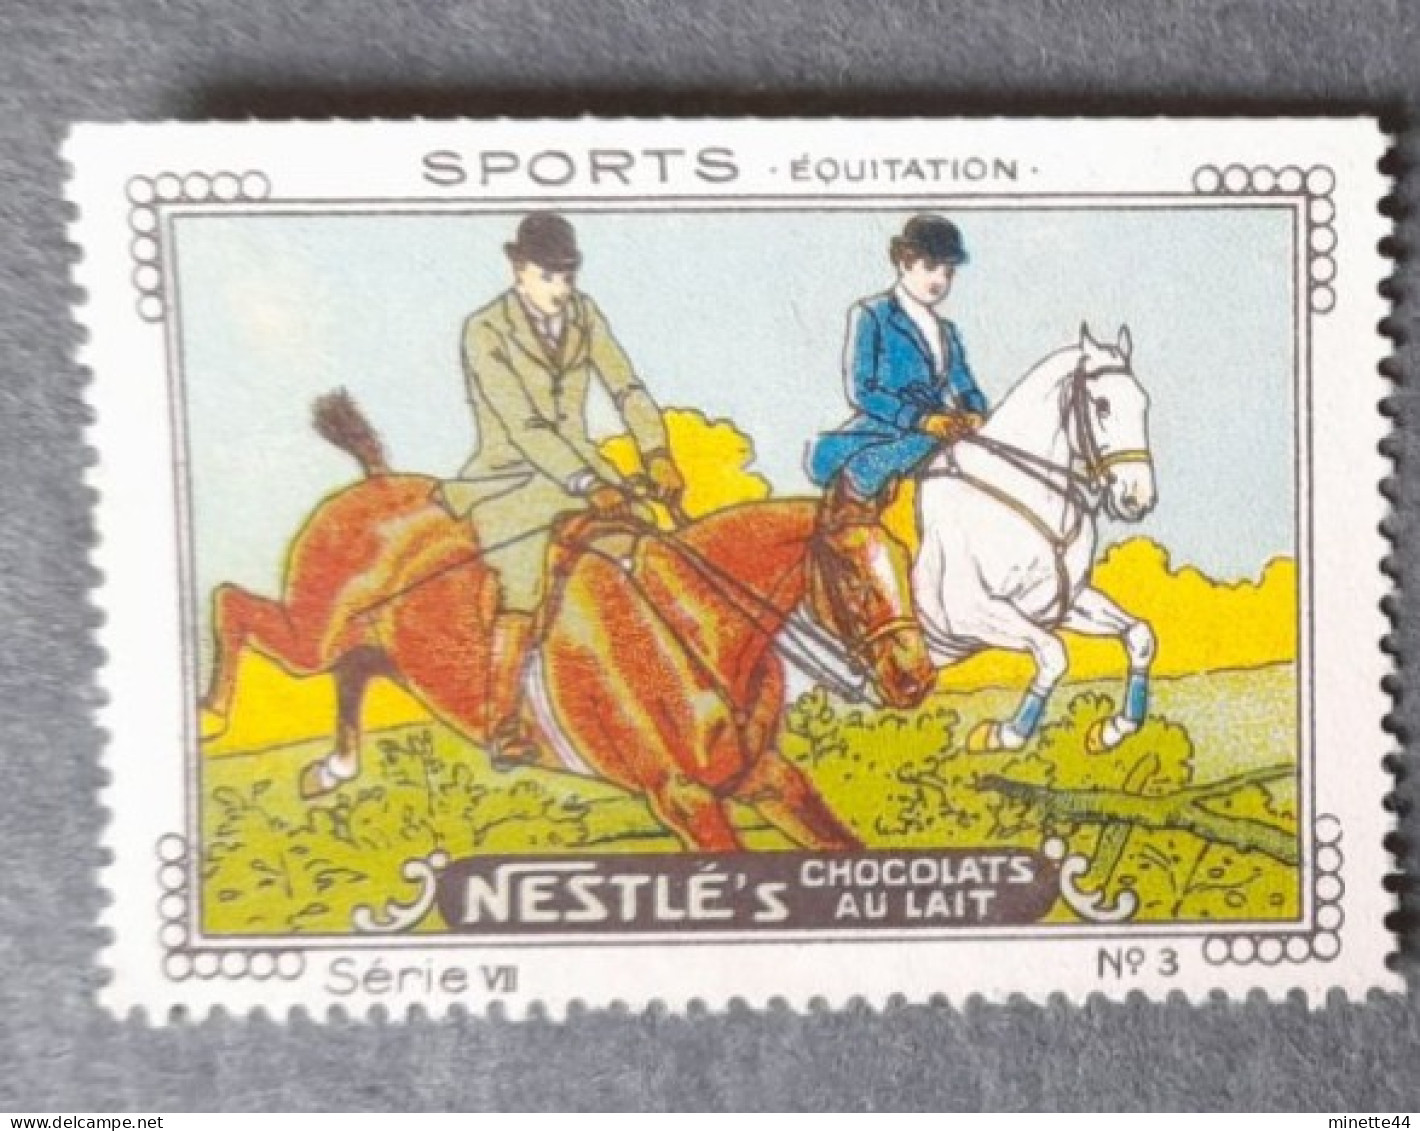 SUISSE 1900' JUMPING EQUITATION NESTLE - Jumping